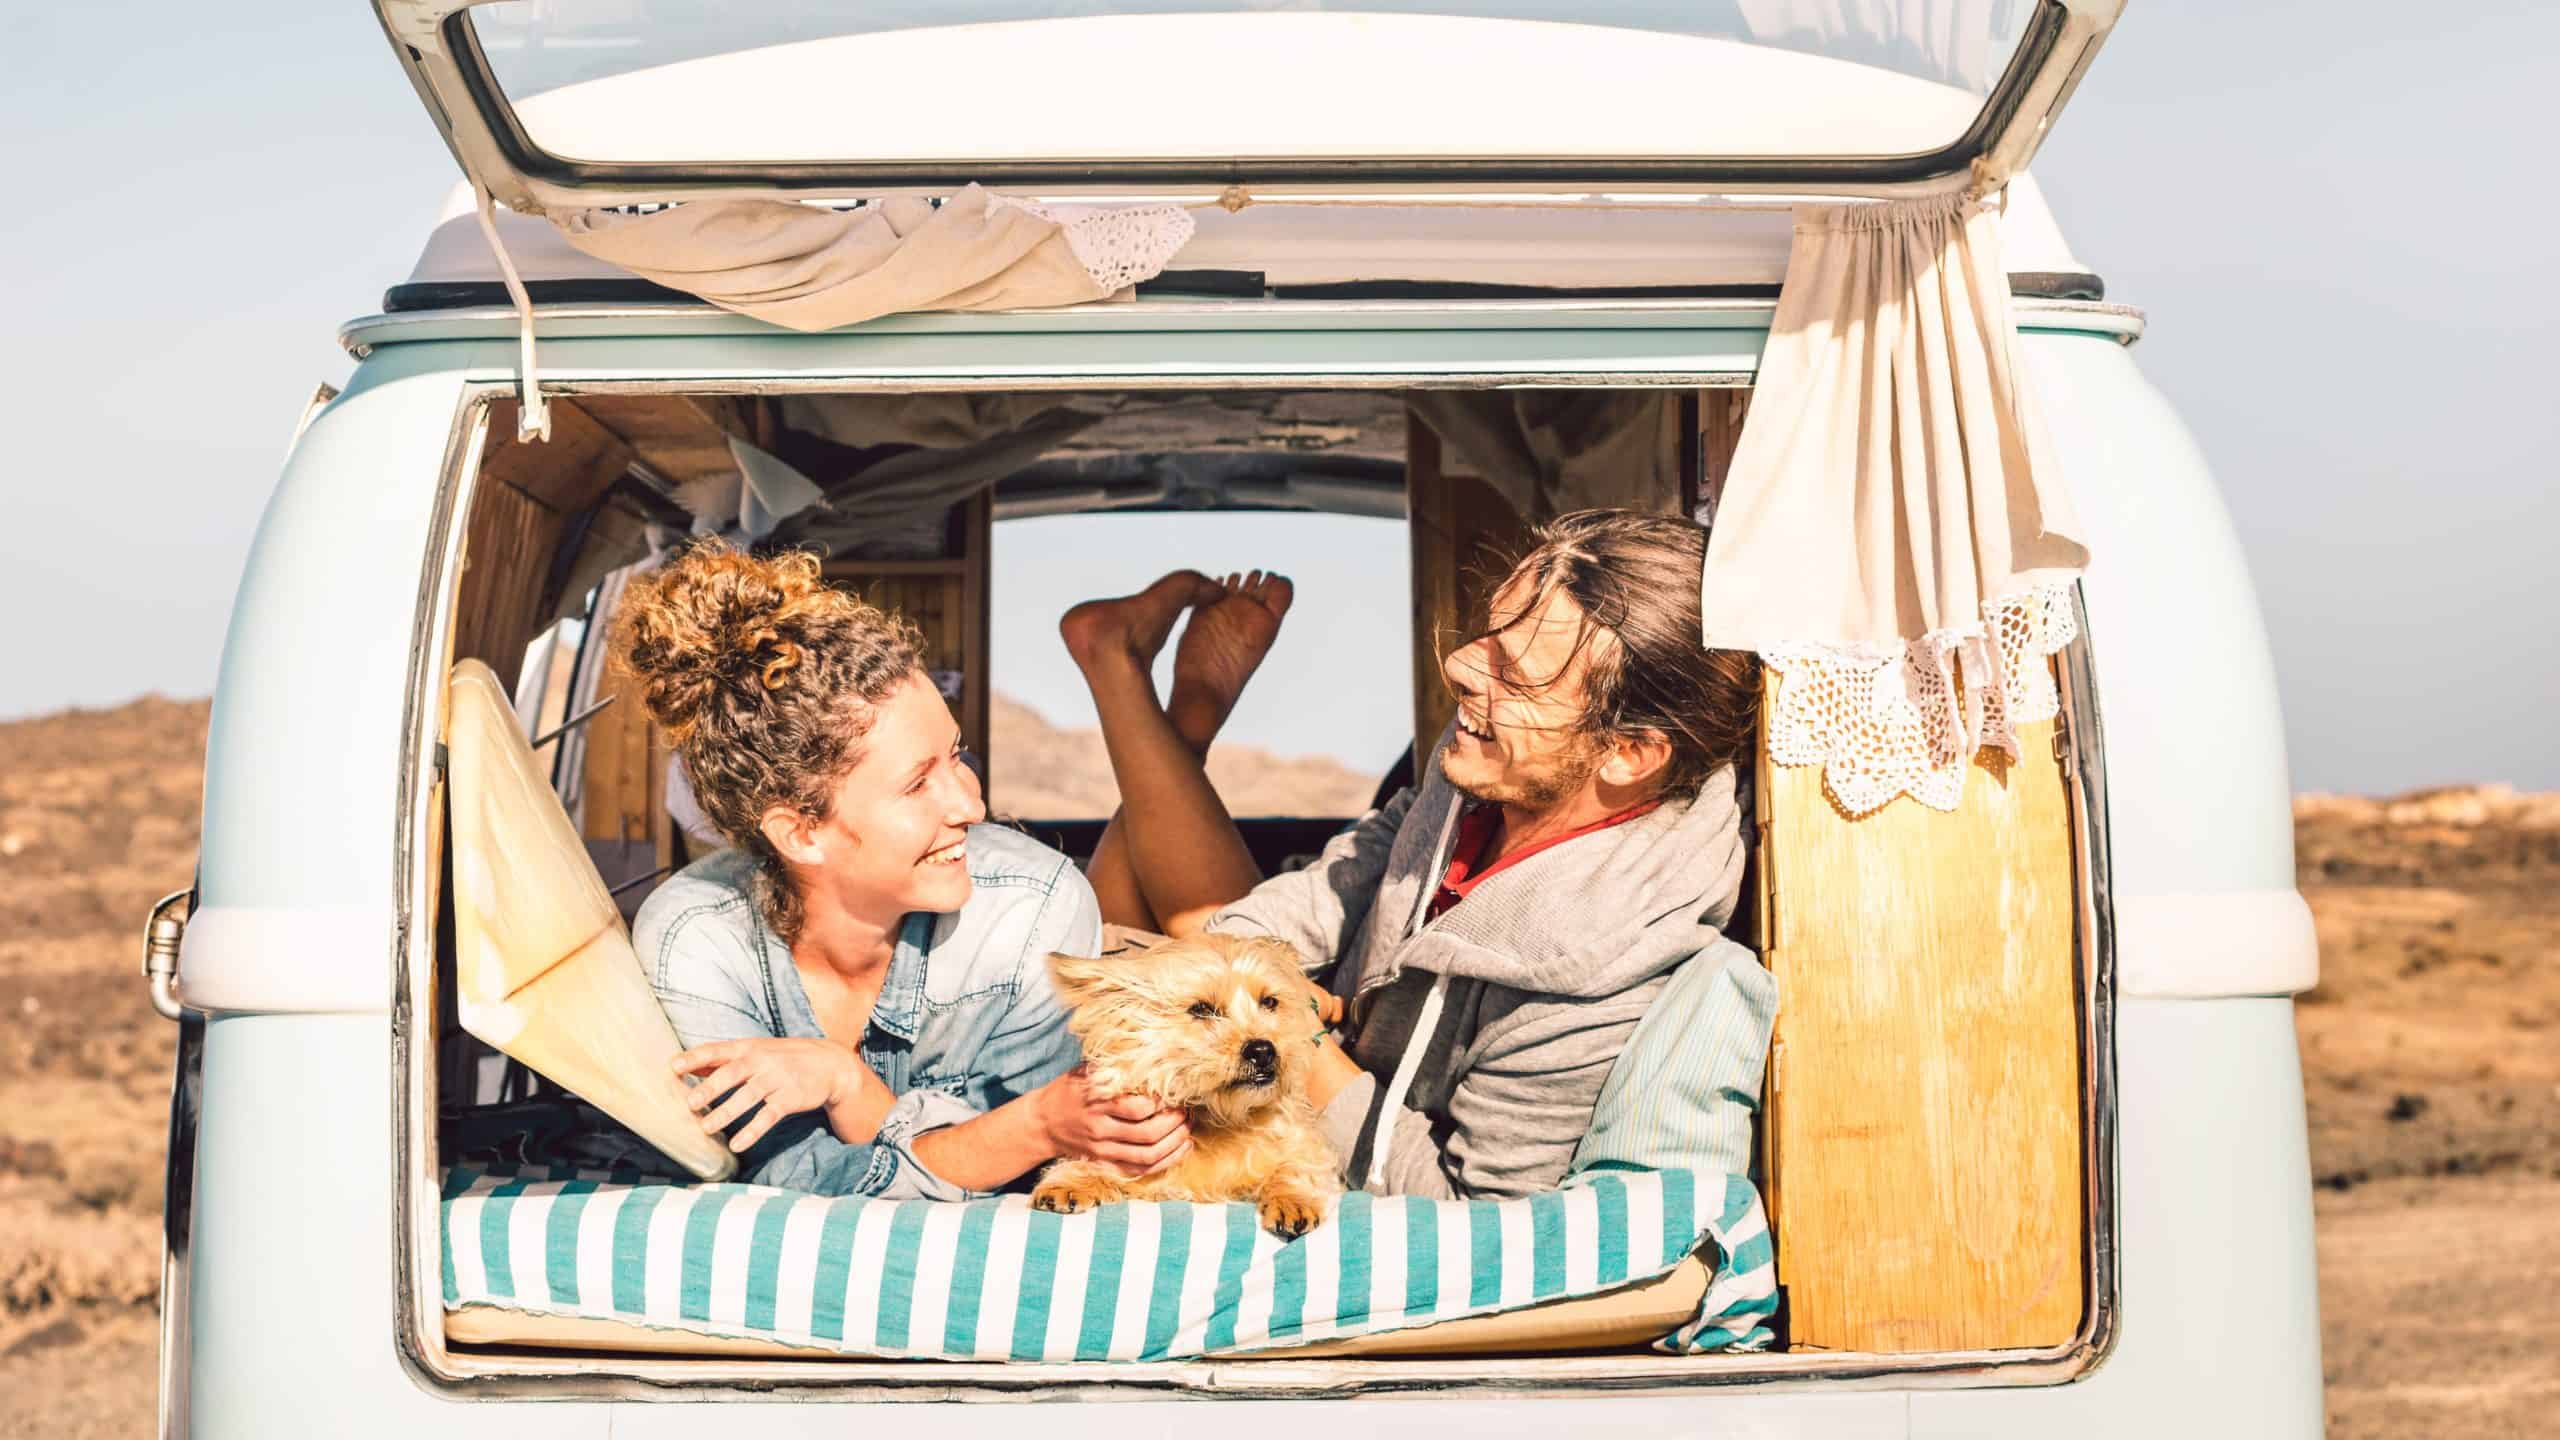 Hipster couple camps with their dog in vintage van. Use this list of tips and tricks to make car camping with your dog go smoothly.